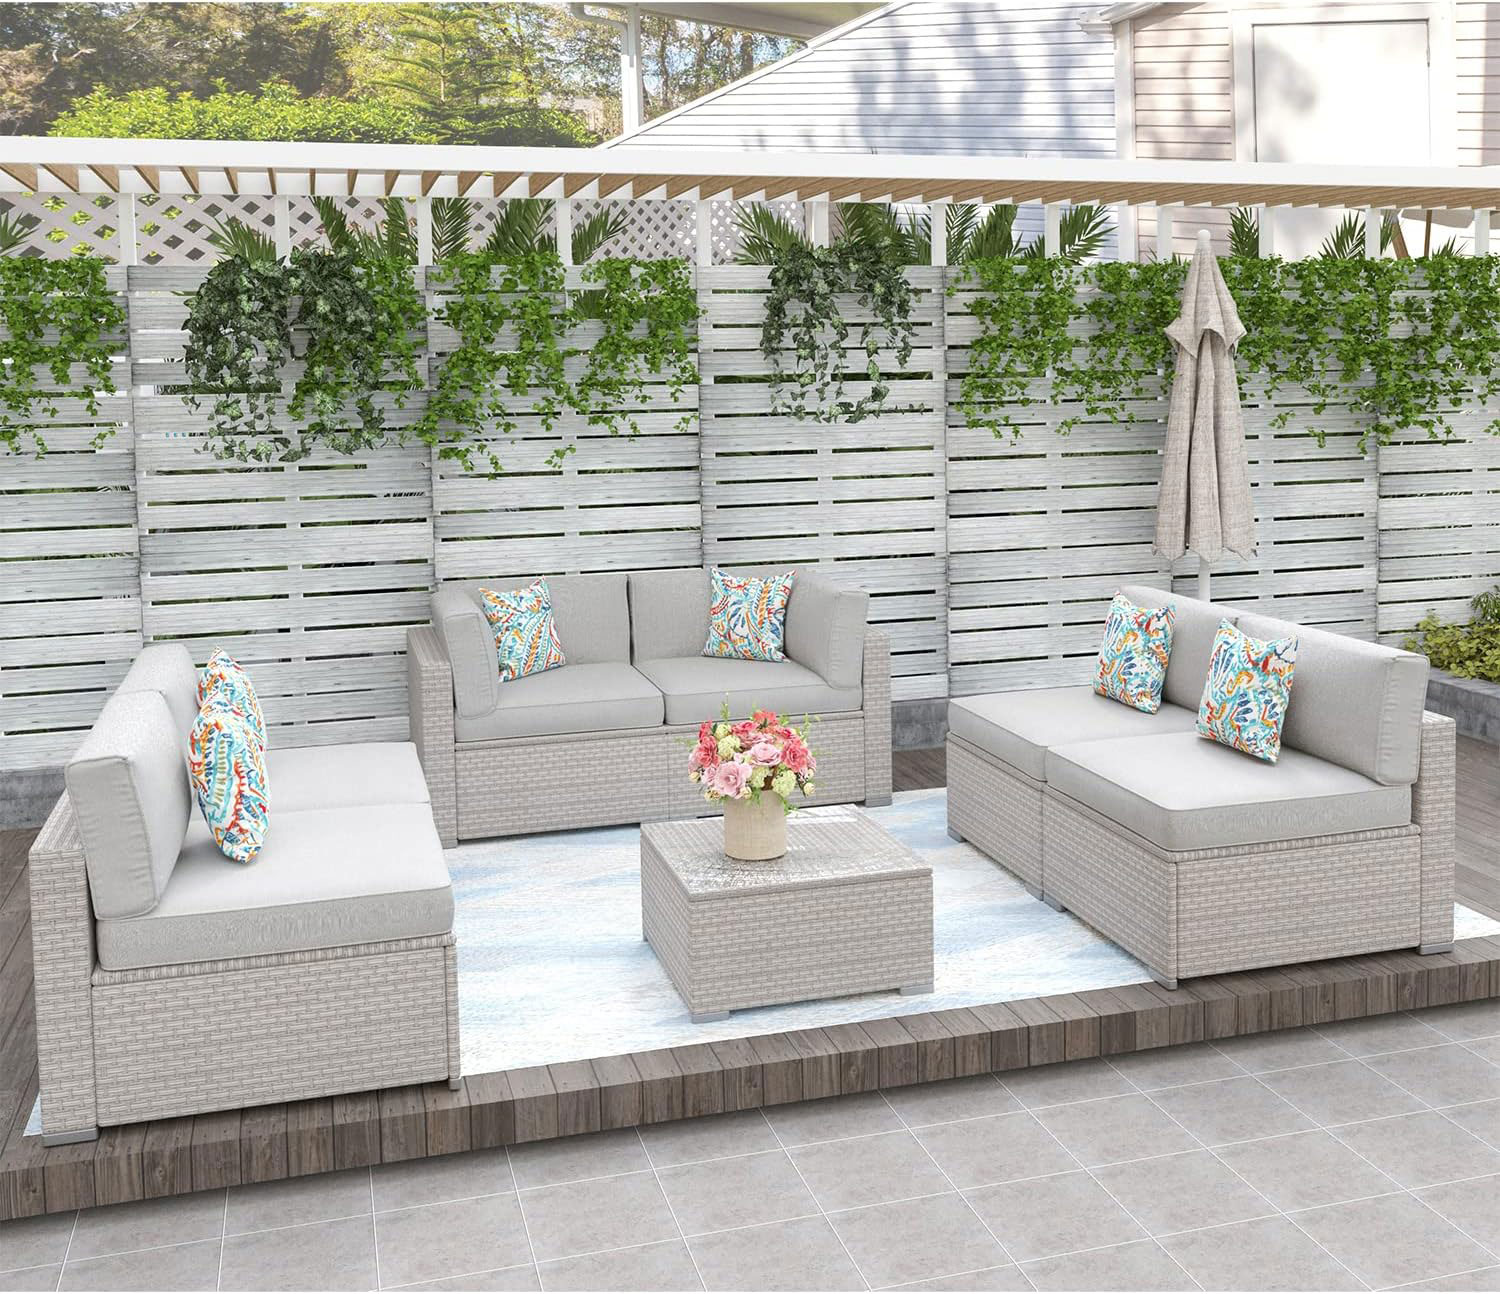 Learn more about the HOMPUS 7-Pieces Outdoor Patio Furniture Set.